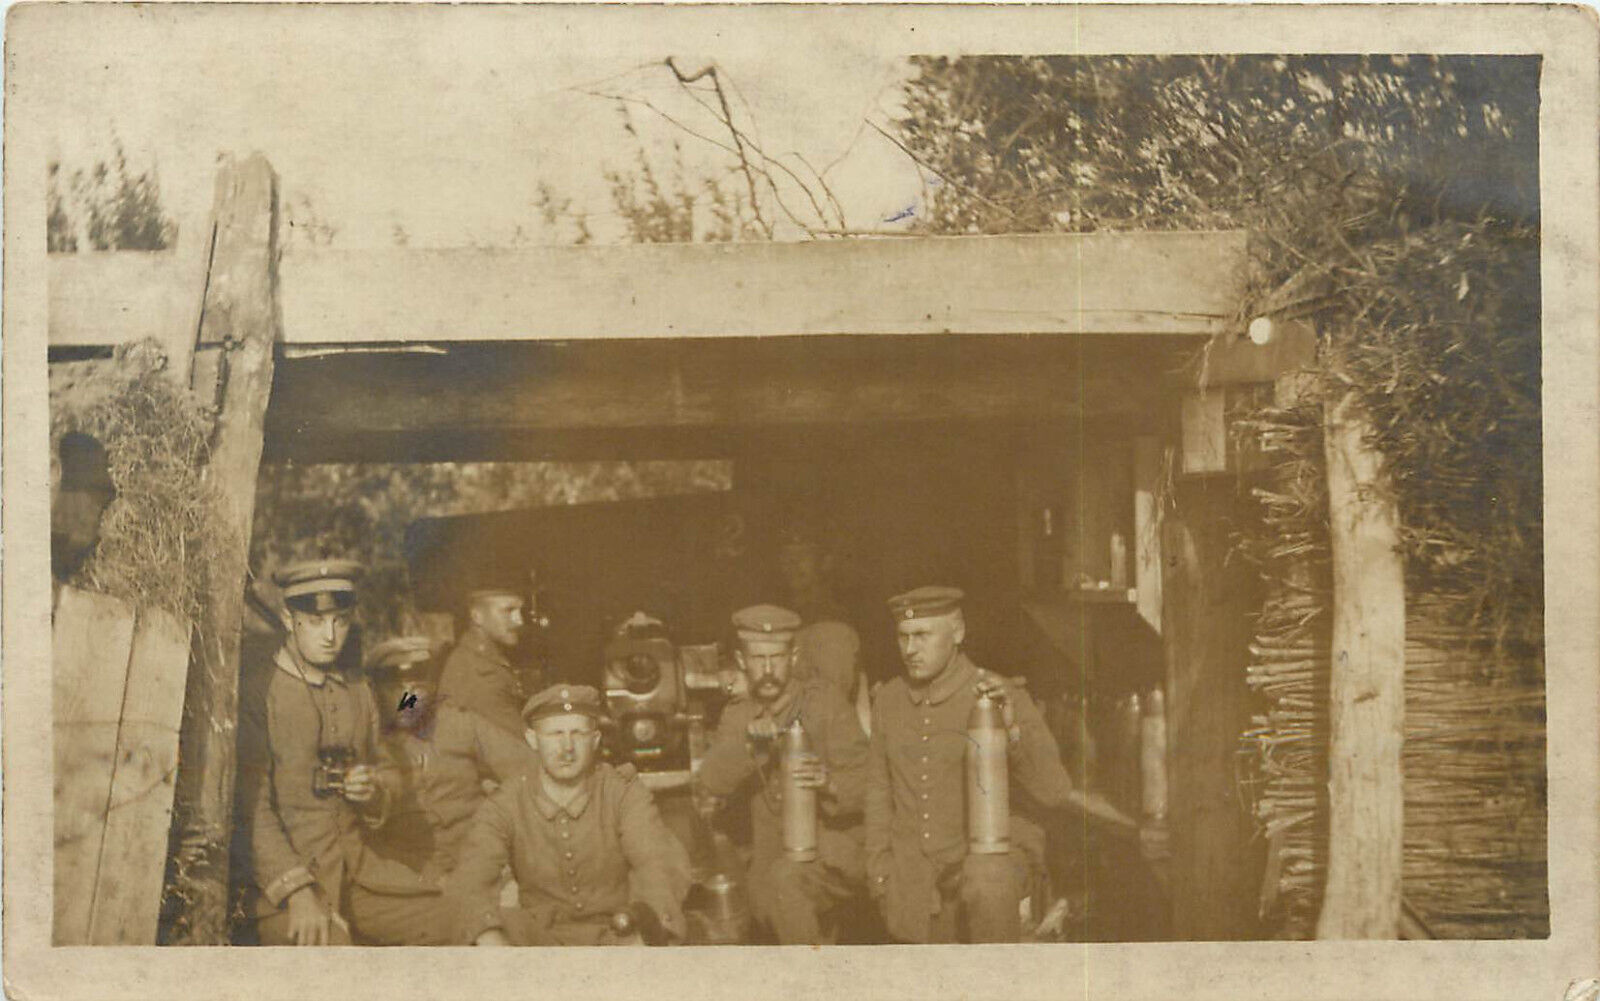 WWI RPPC Postcard Central Powers Artillery Men and officer Hold Shells In Dugout